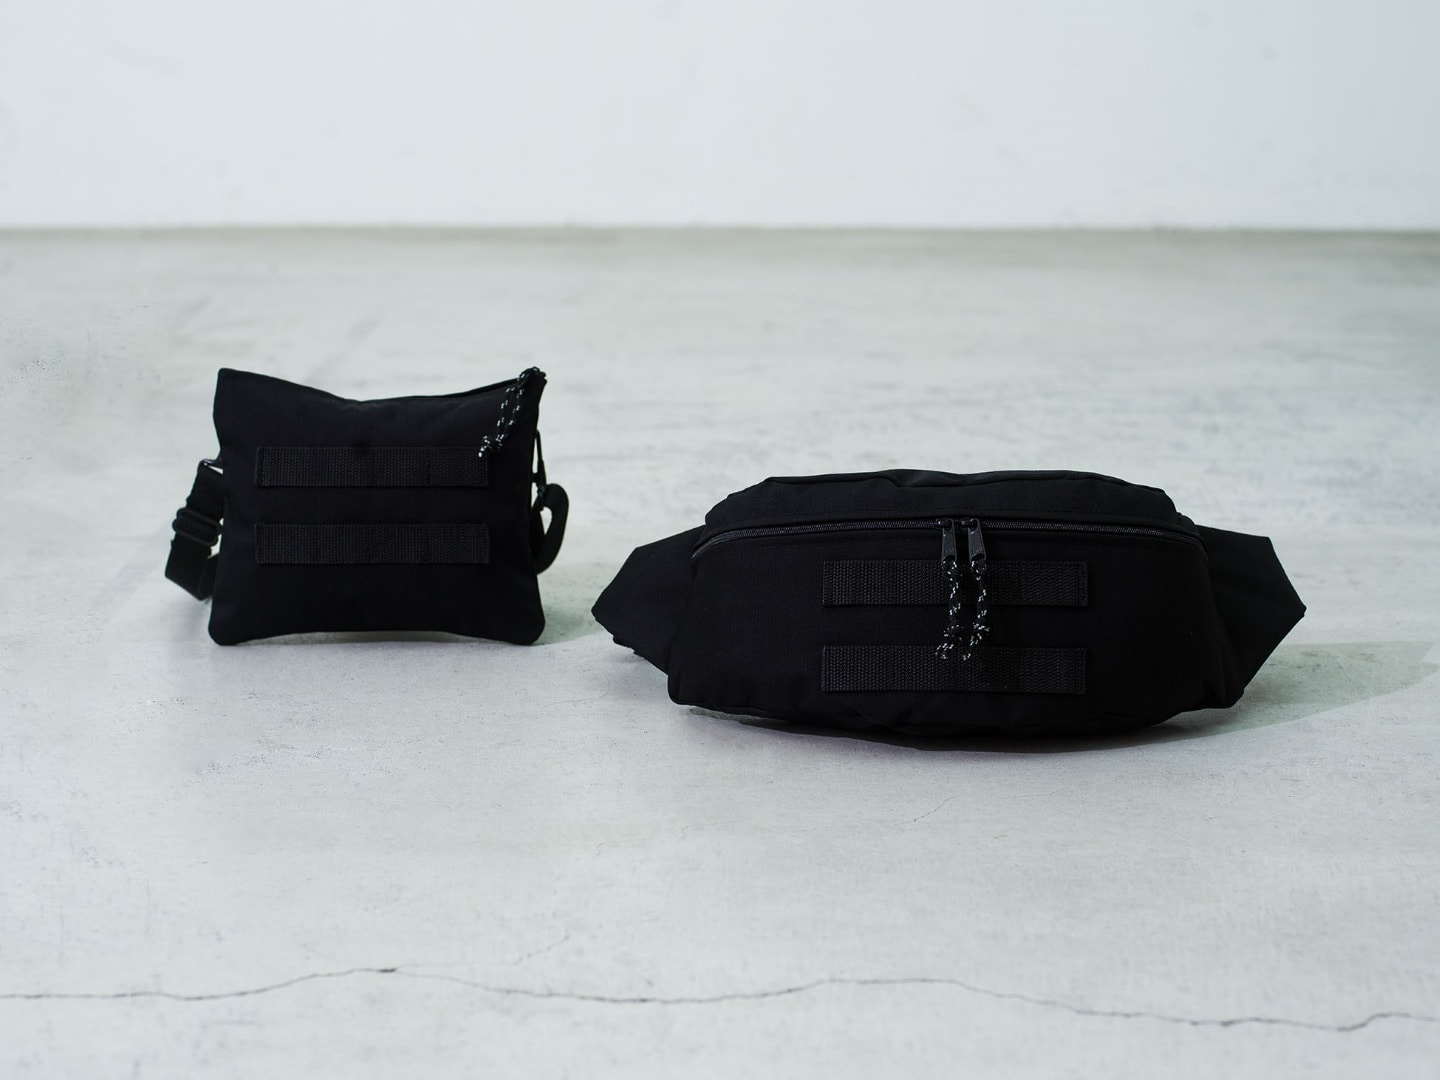 JIM MELVILLE for Ron Herman Bag Collection New Arrival News｜Ron 